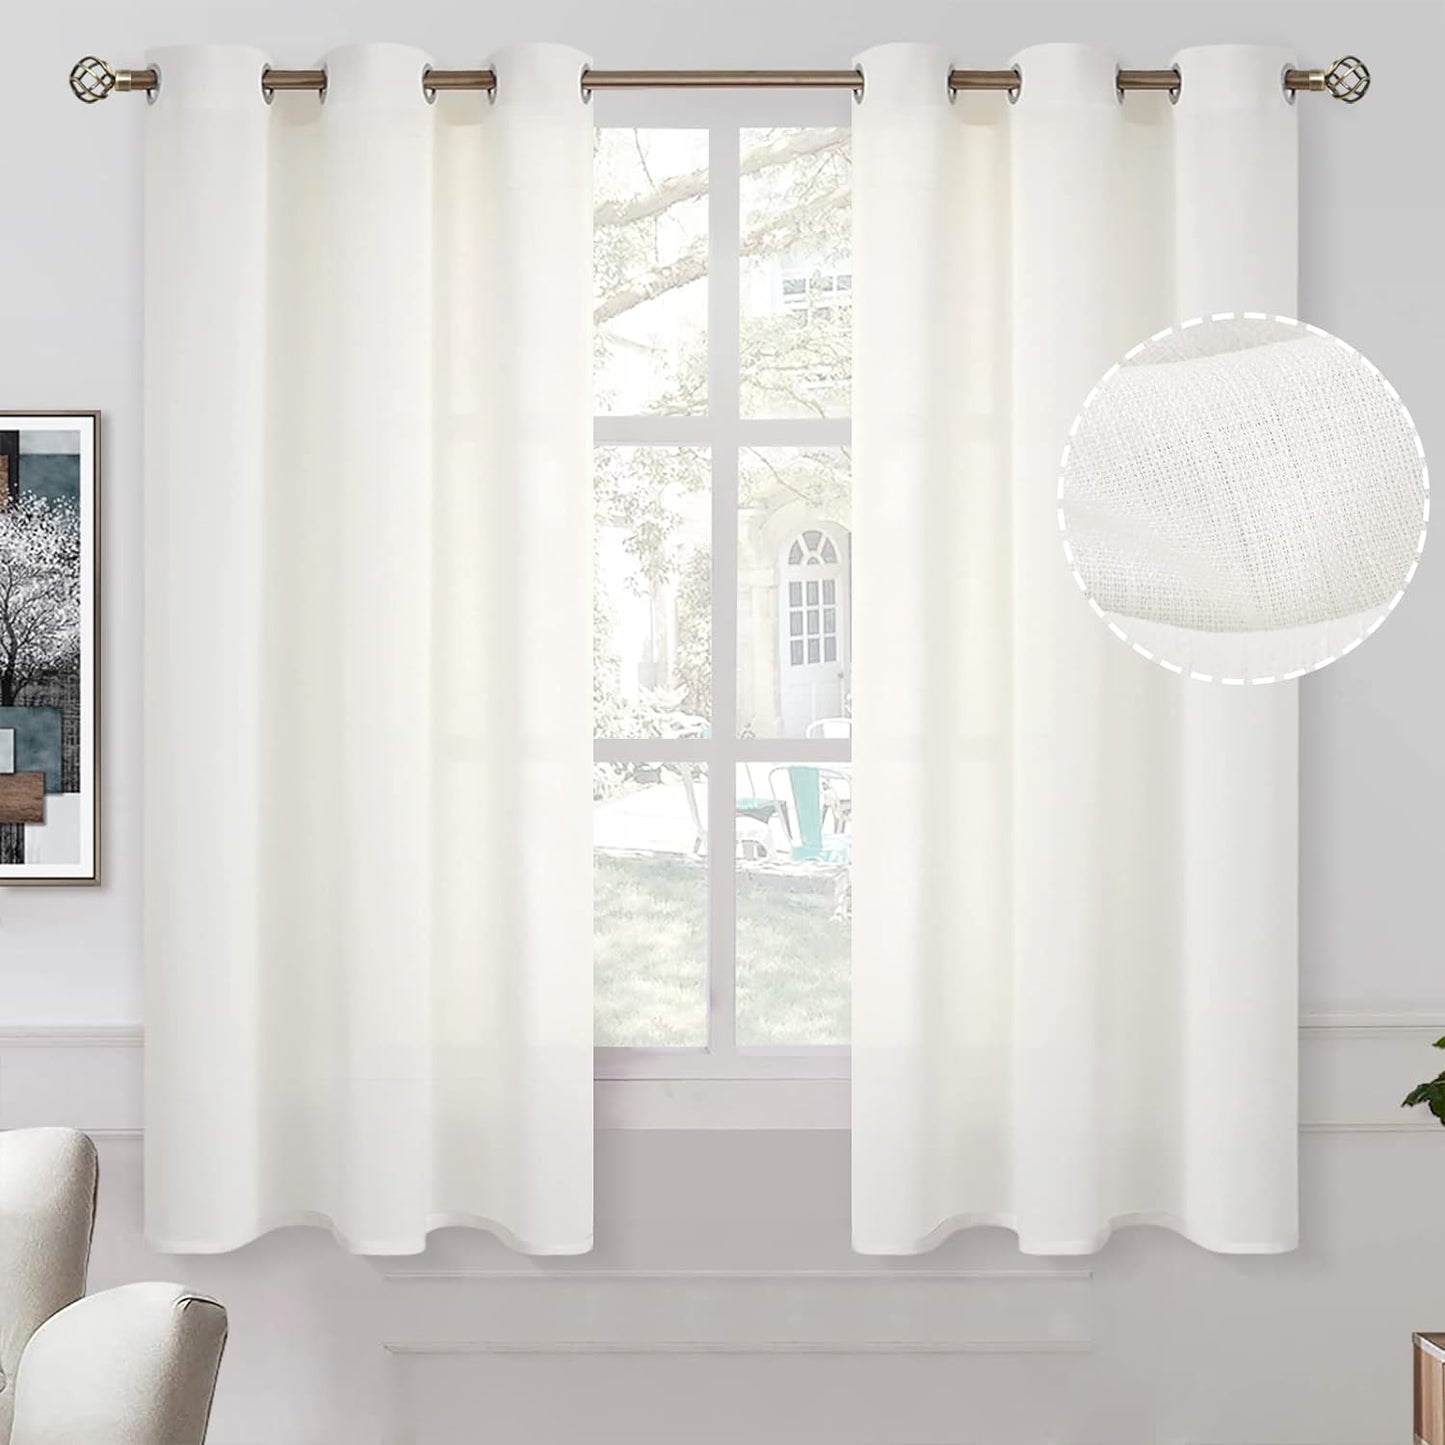 Bgment Natural Linen Look Semi Sheer Curtains for Bedroom, 52 X 54 Inch White Grommet Light Filtering Casual Textured Privacy Curtains for Bay Window, 2 Panels  BGment Ivory Cream 42W X 45L 